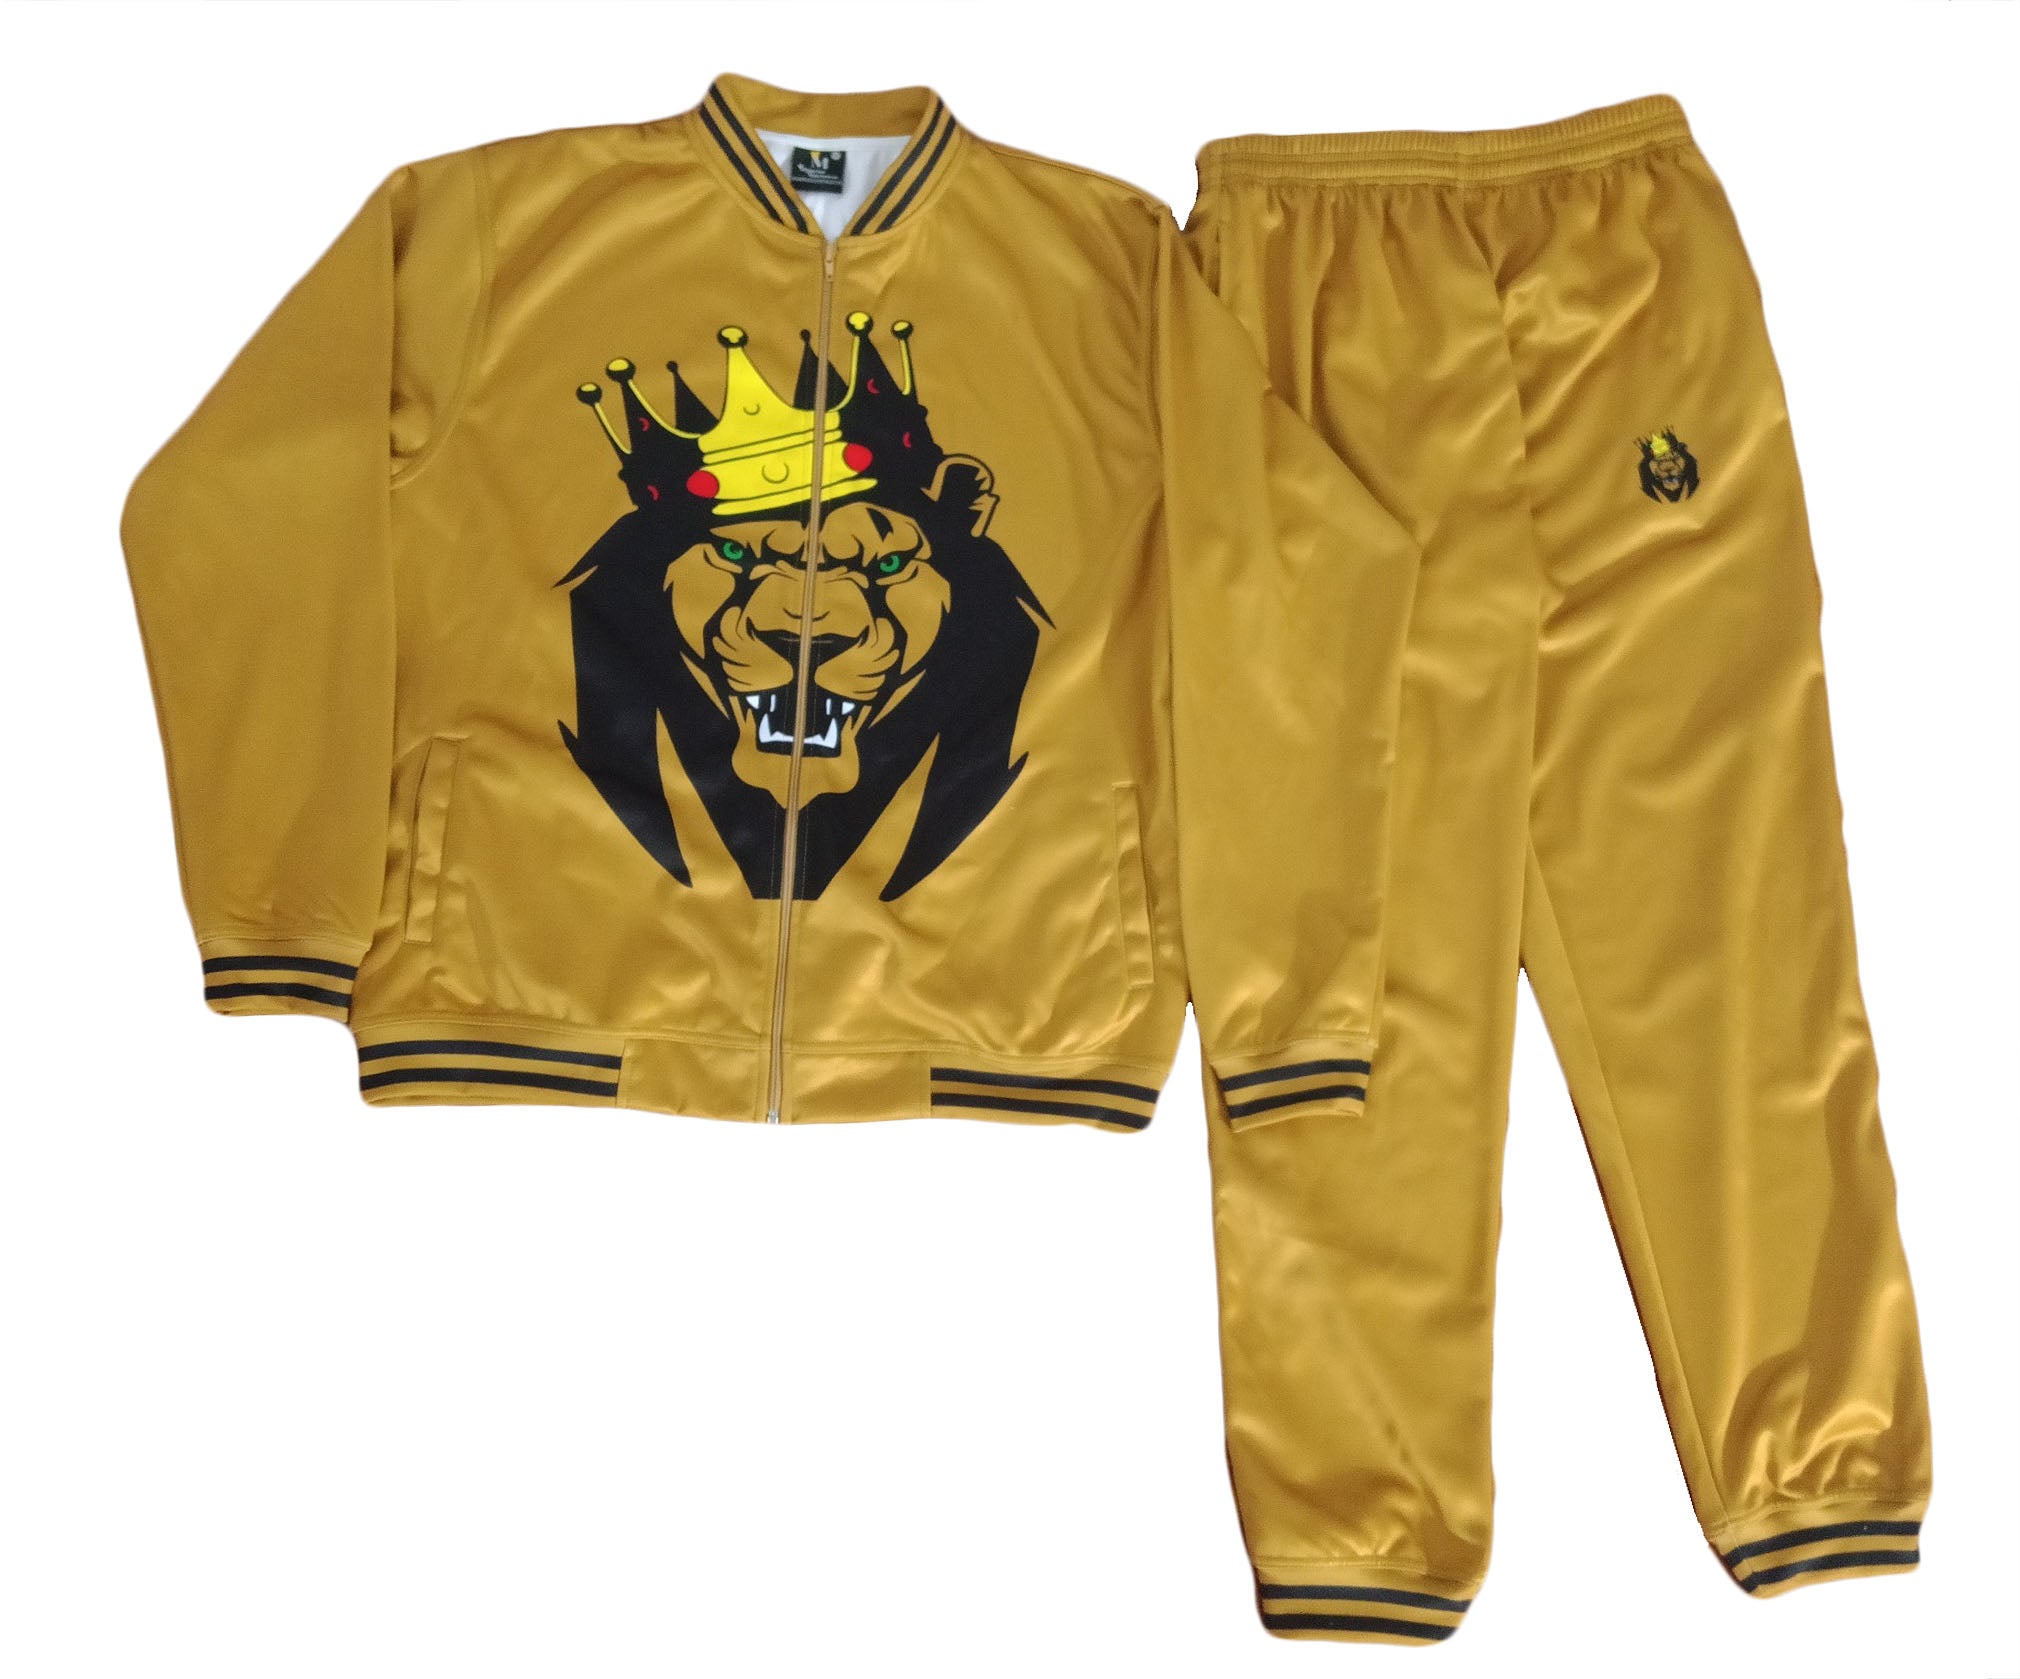 Mperial Gold Tracksuit